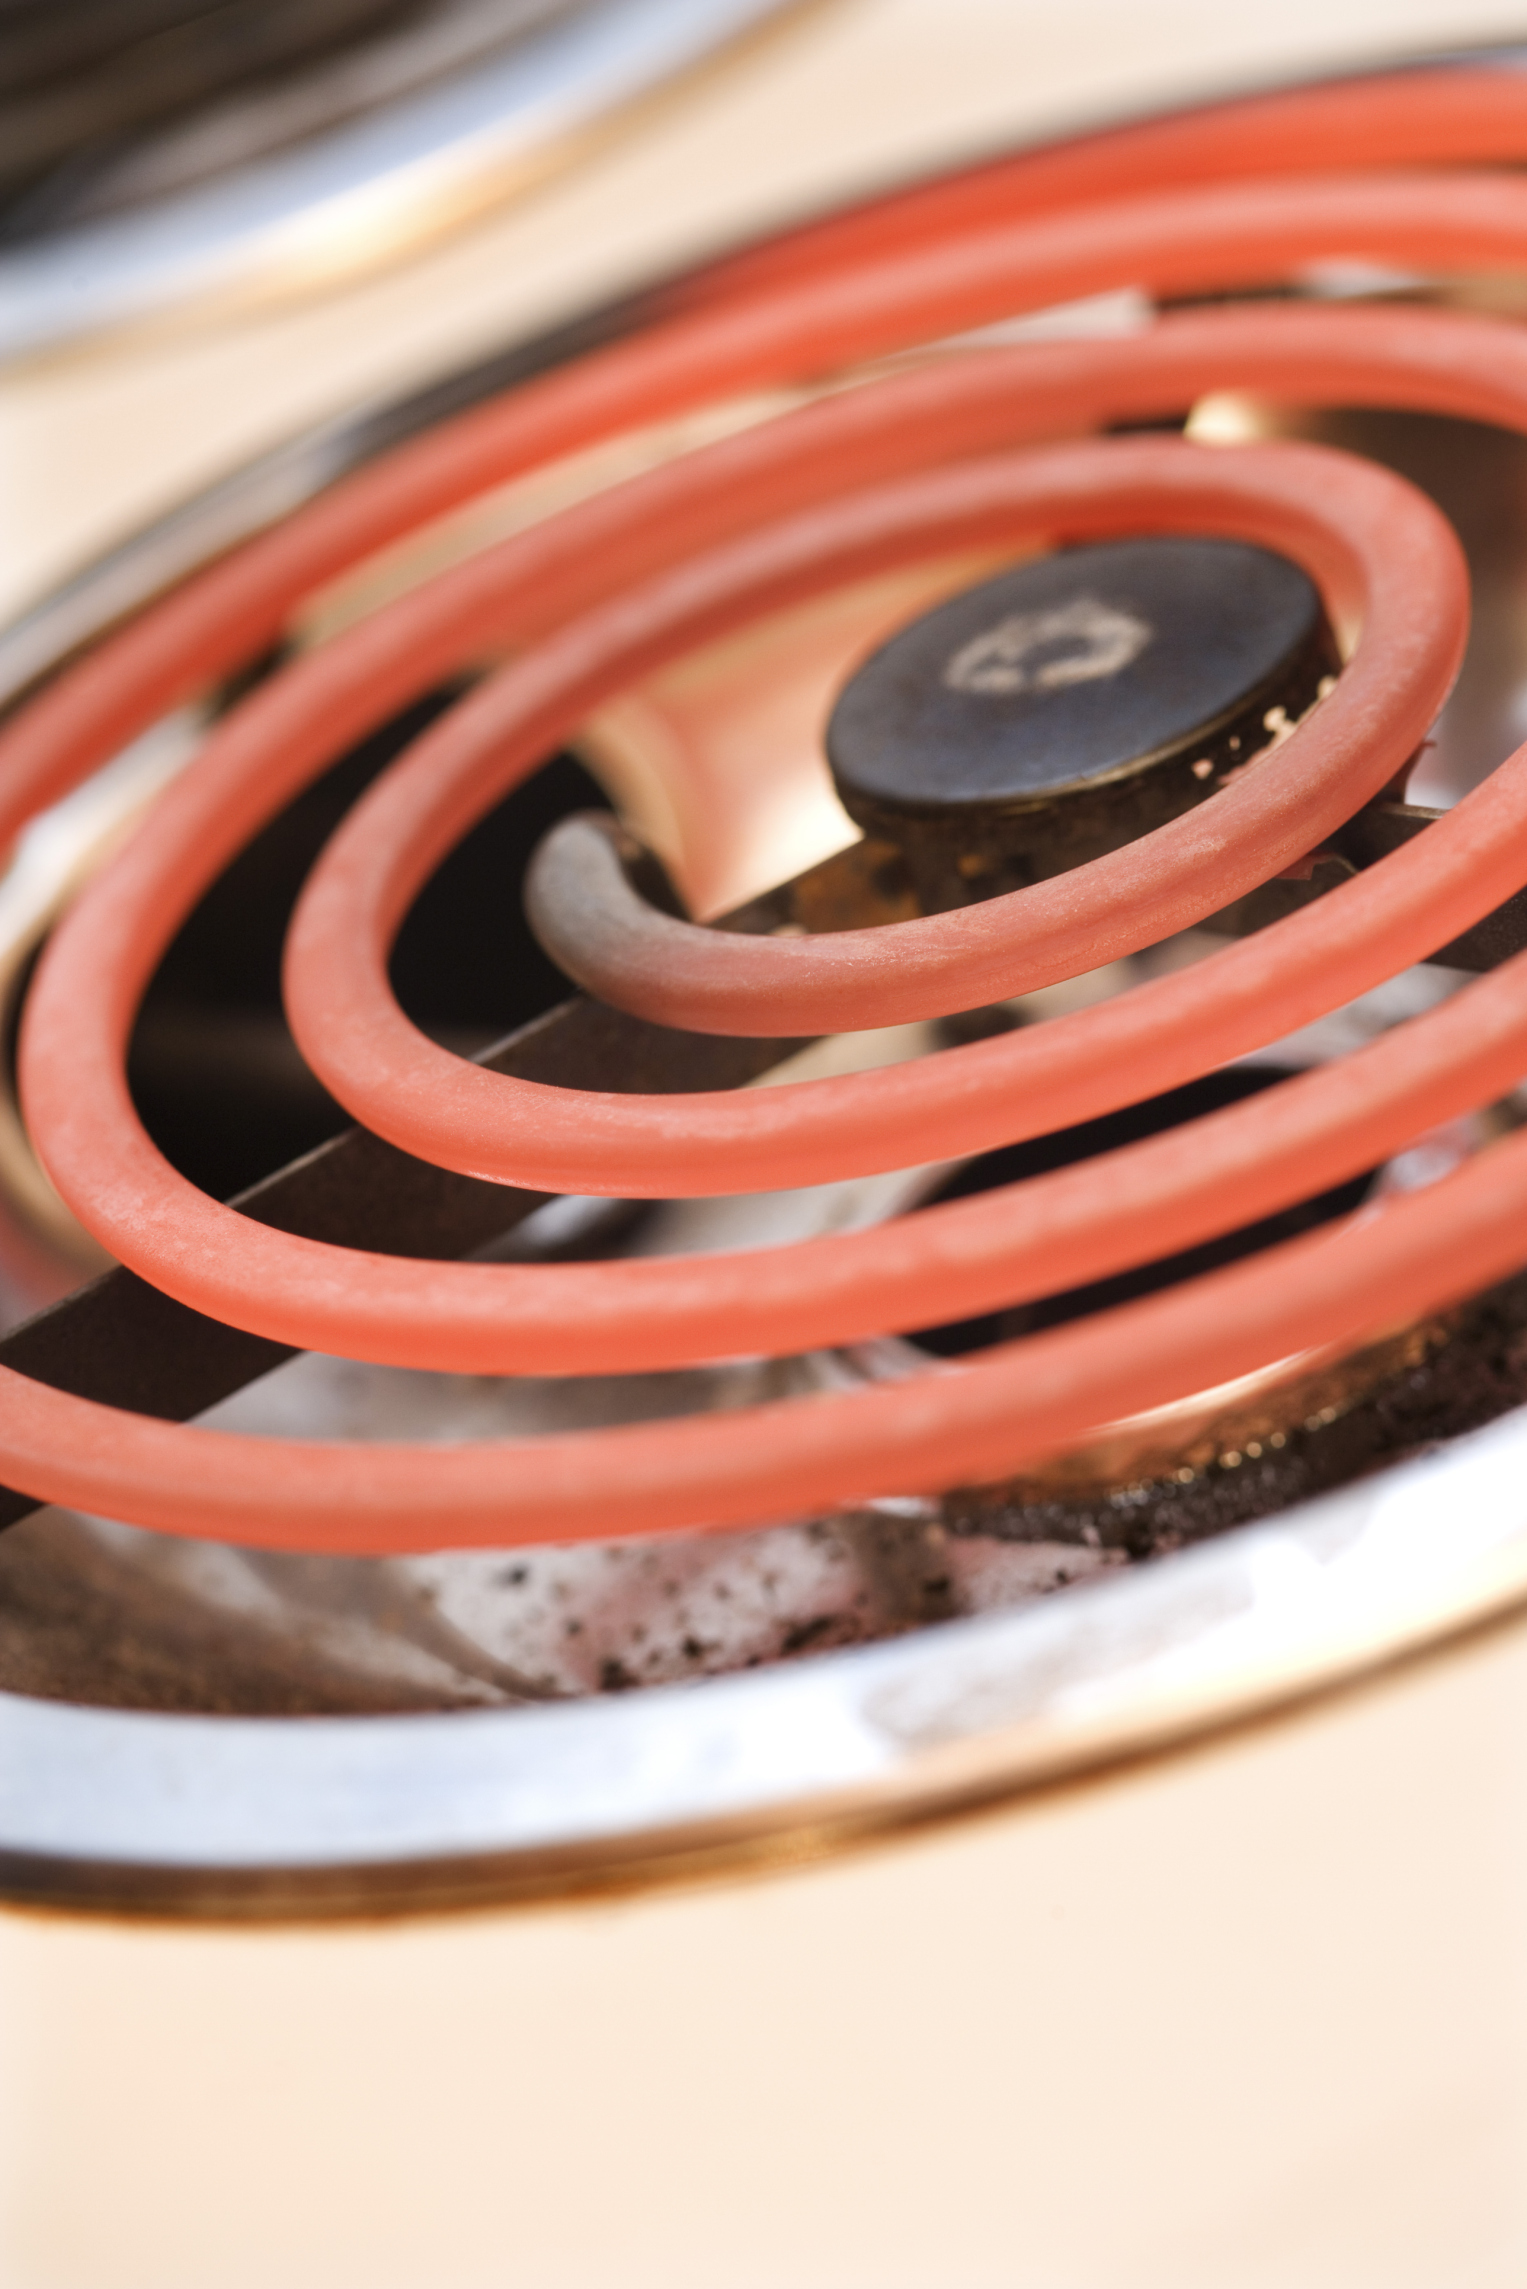 How to Get Burnt Food Off of an Electric Stove's Heat Coils